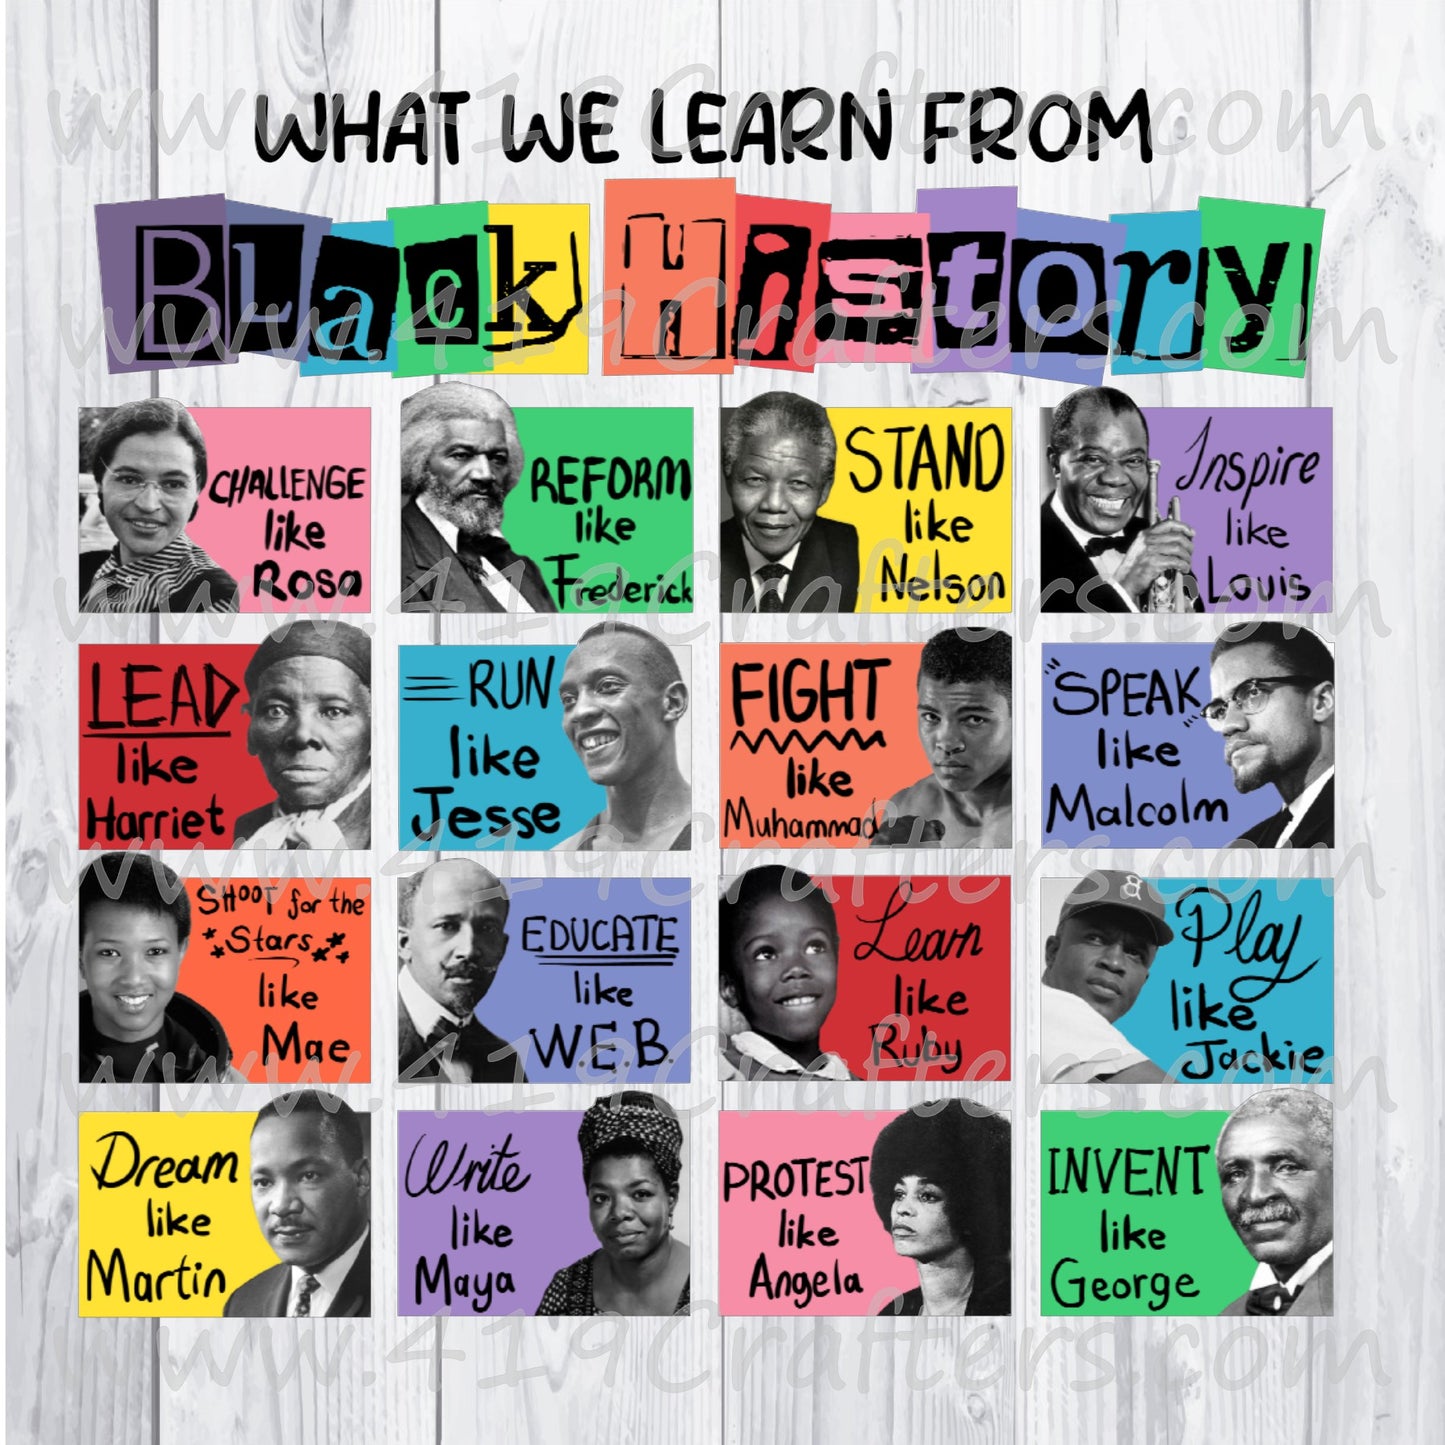 WHAT WE LEARN FROM BLACK HISTORY